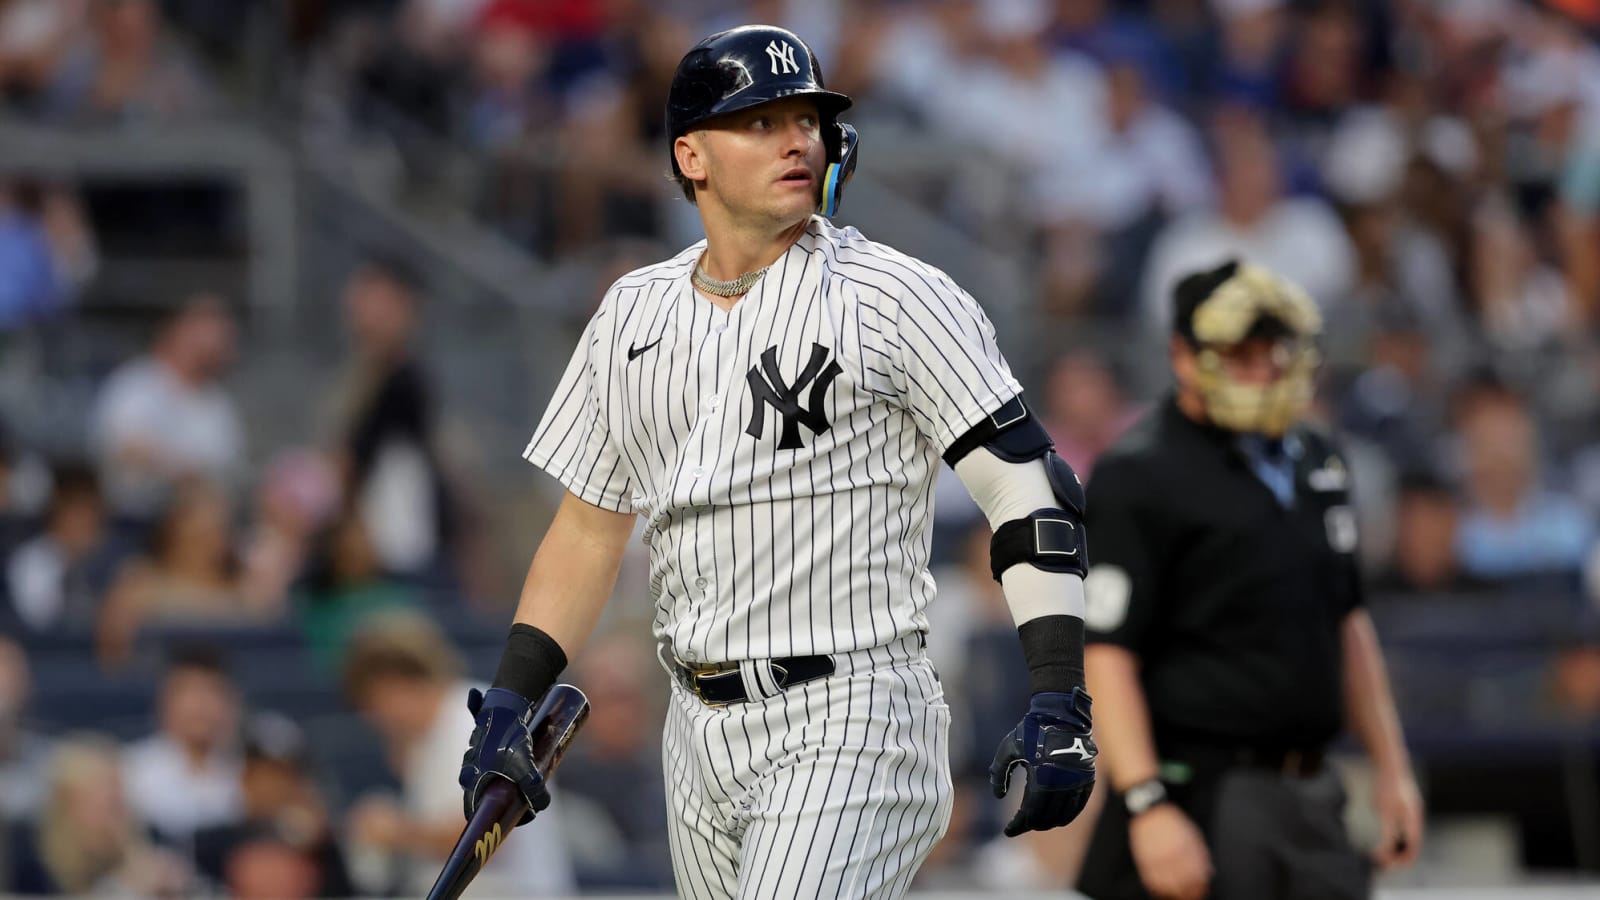 Yankees’ controversial third baseman announces retirement after 13-year career